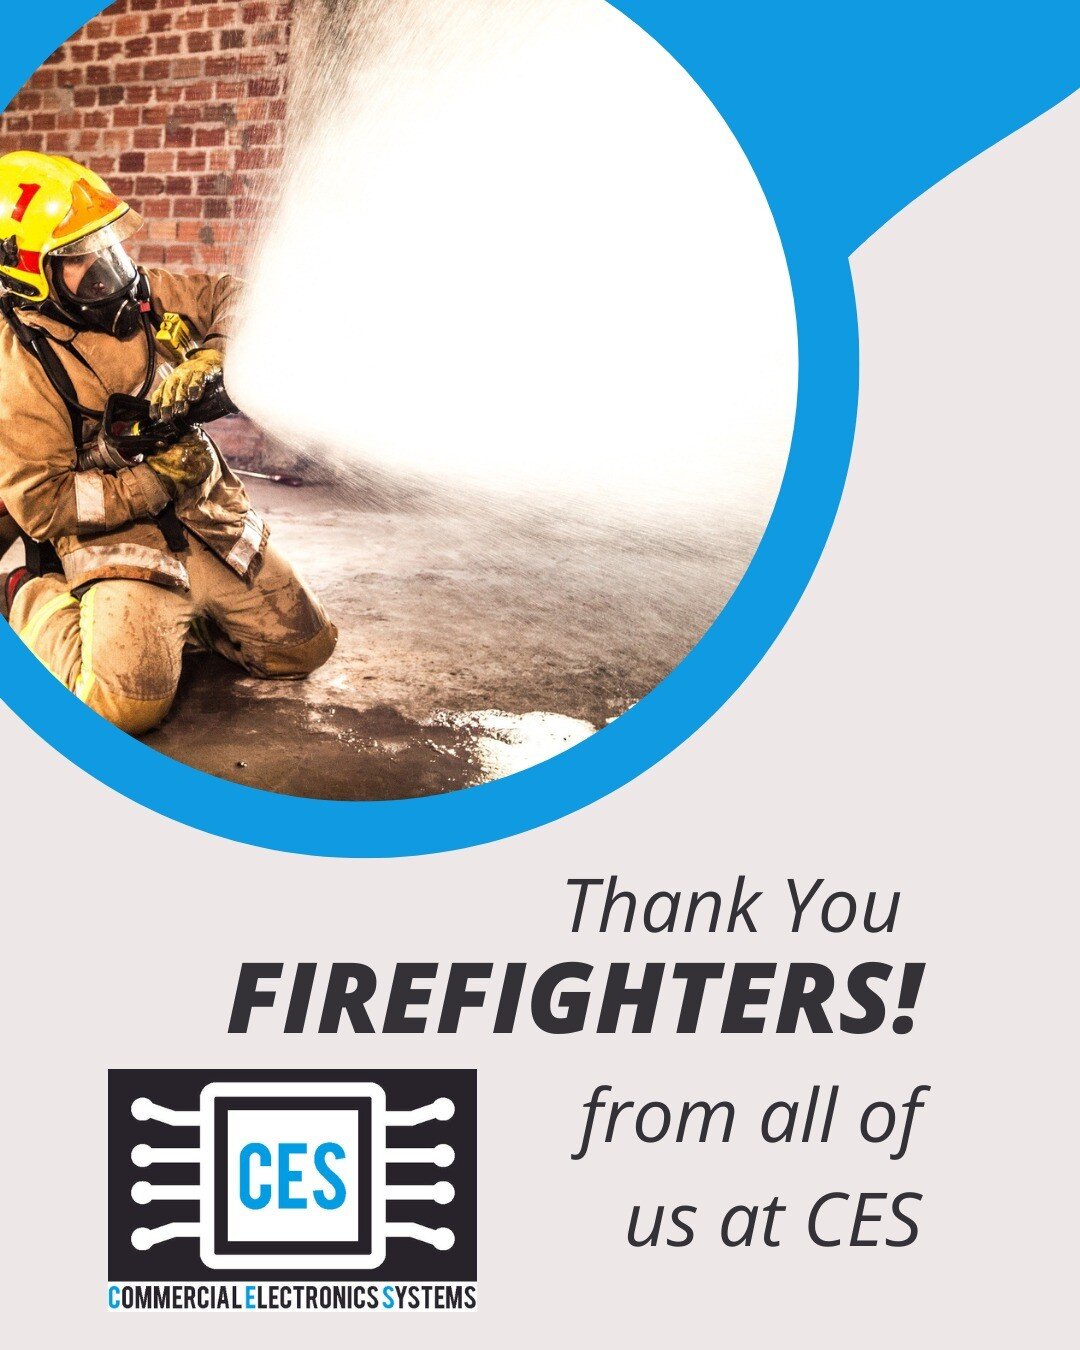 Happy National Firefighters Day! Thank you for everyone who helps keep our communities safe, especially during #fire season! #thankafirefighter #NationalFirefightersDay #FireSafetyAwareness #CESTHANKSYOU